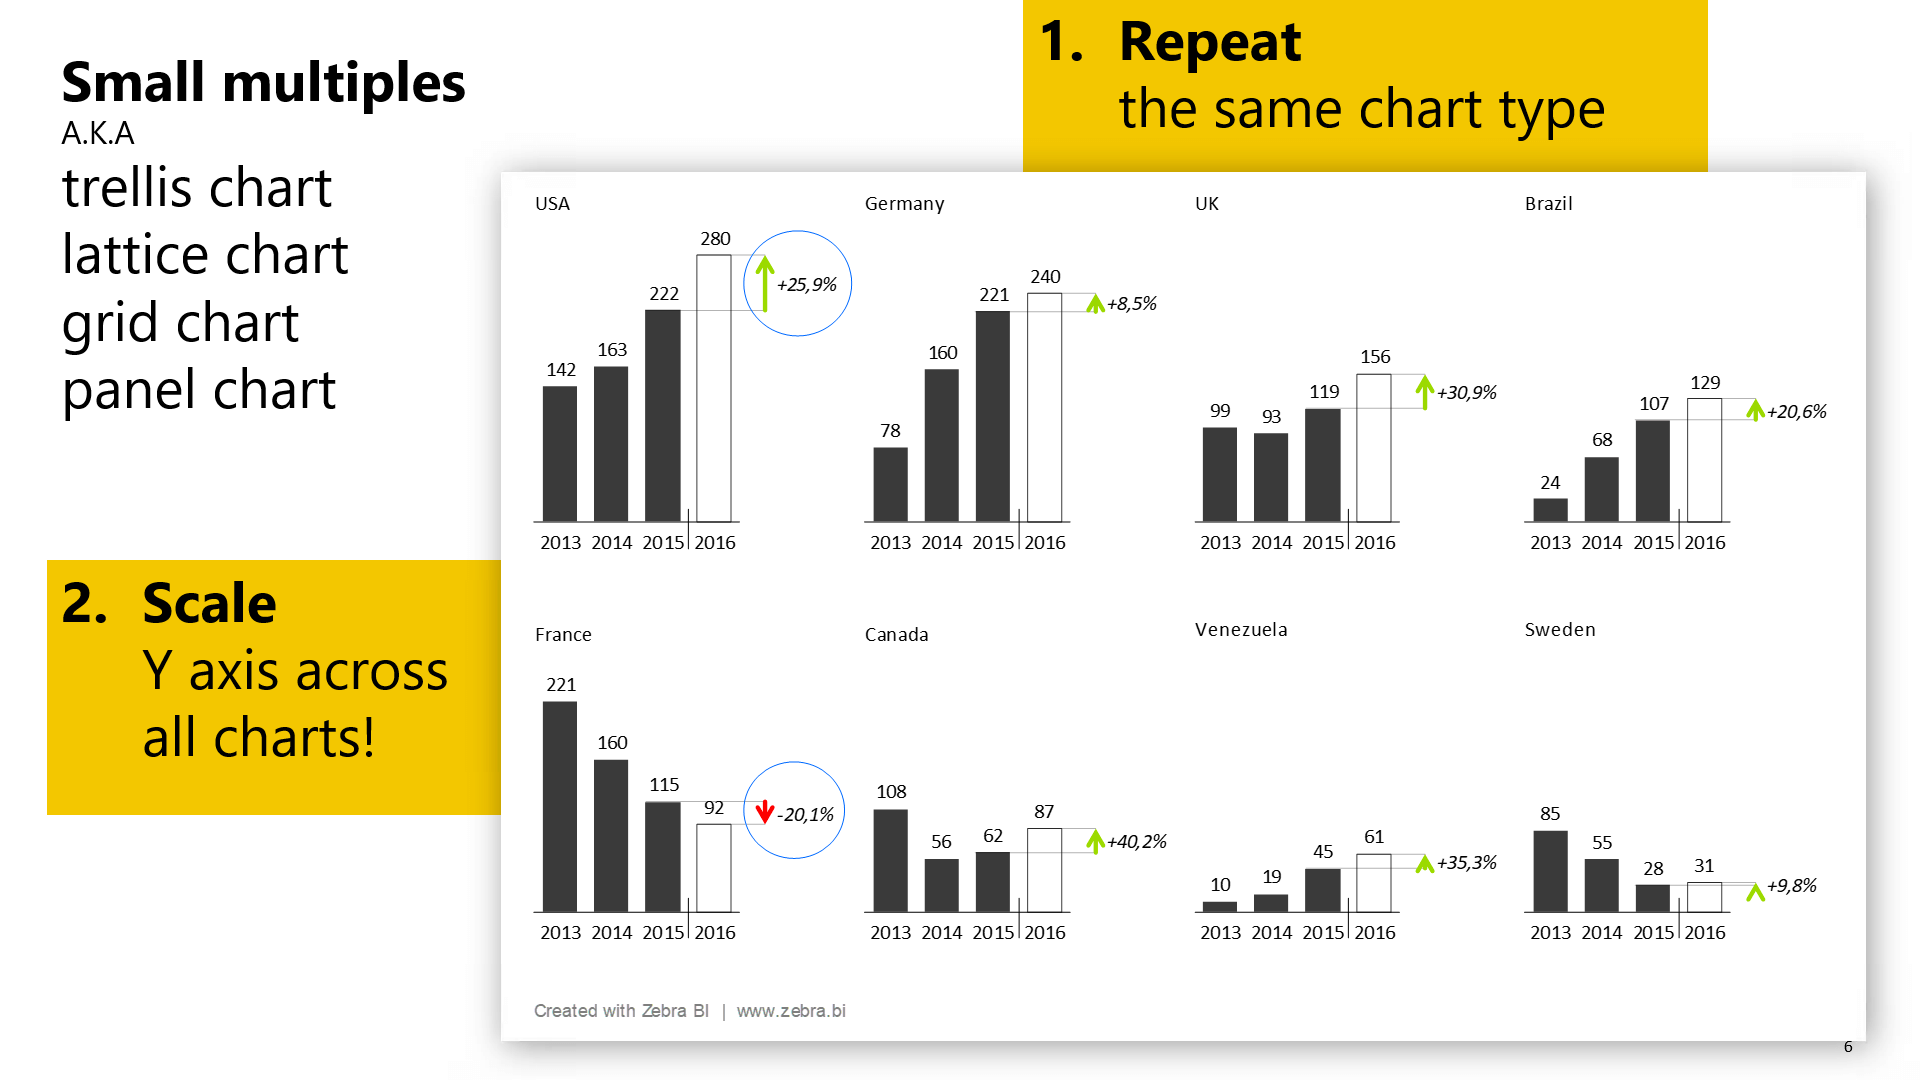 Small multiples - Repeat charts and scale them